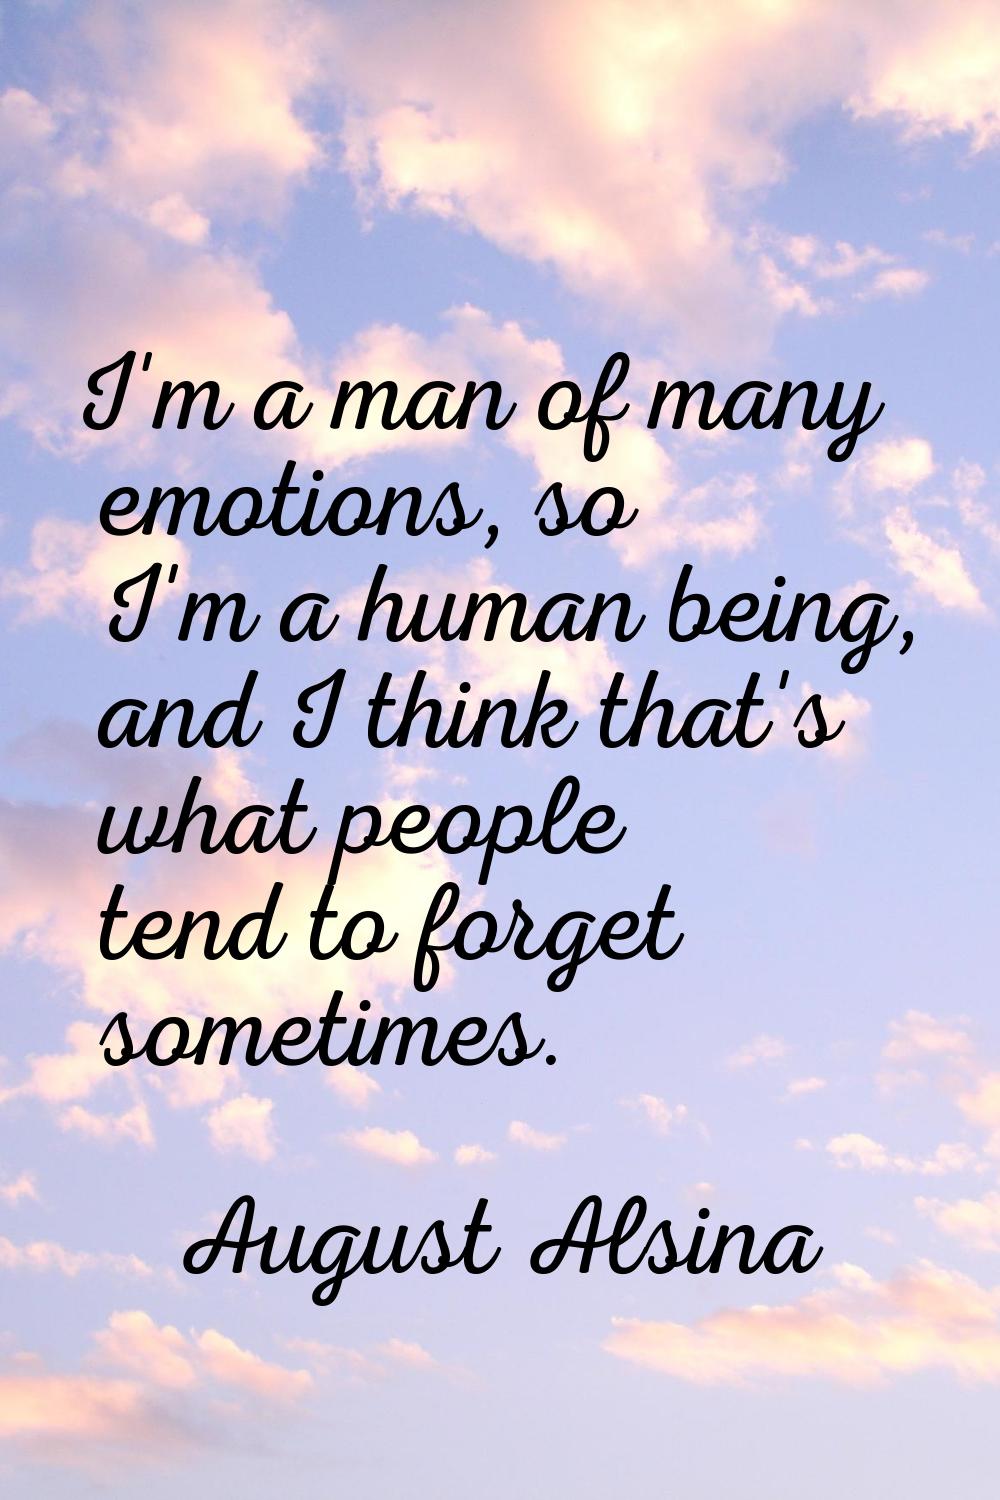 I'm a man of many emotions, so I'm a human being, and I think that's what people tend to forget som